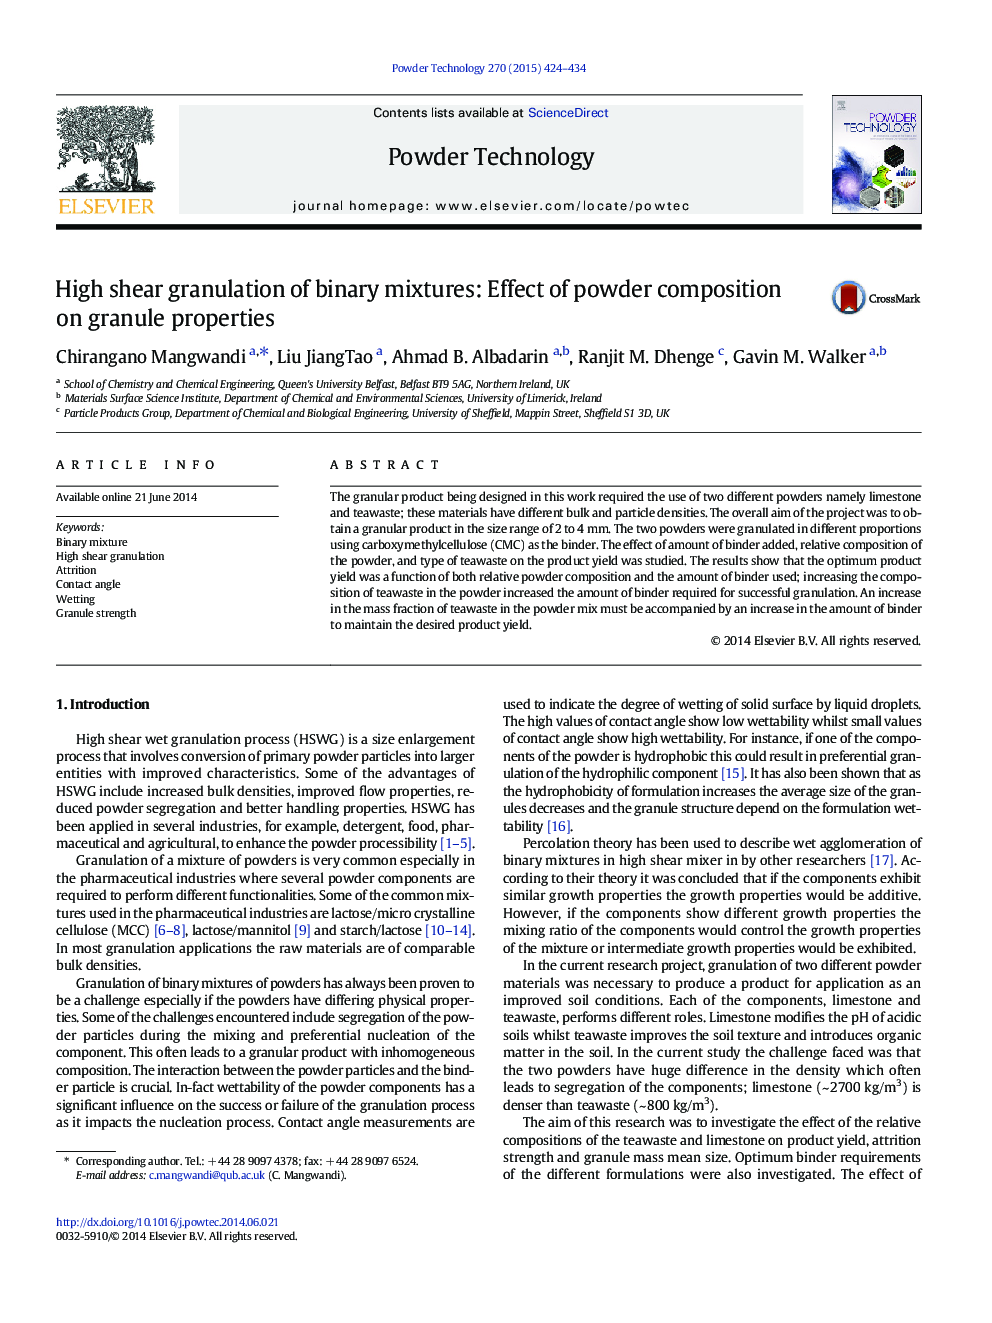 High shear granulation of binary mixtures: Effect of powder composition on granule properties